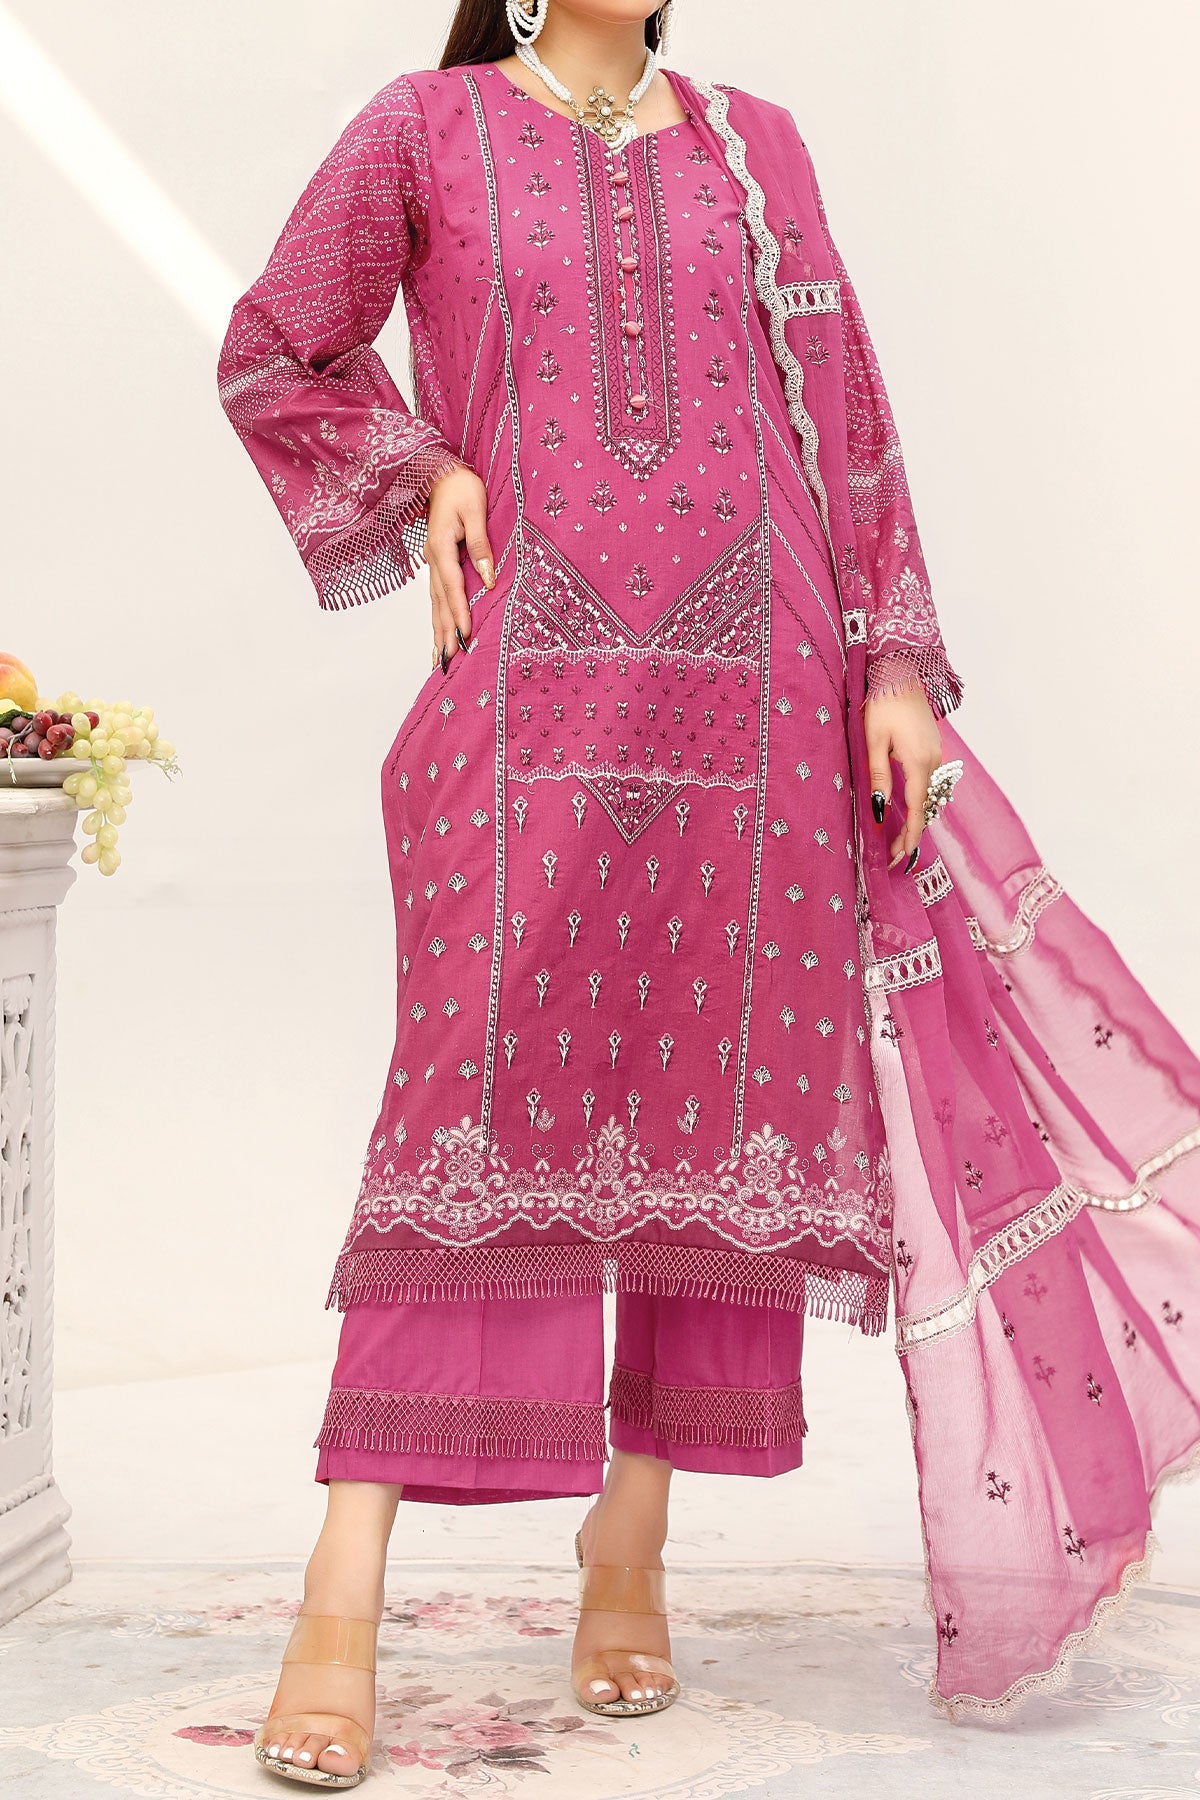 Pretty in Pink - Unstitched 3-Piece Ensemble Suit For Women